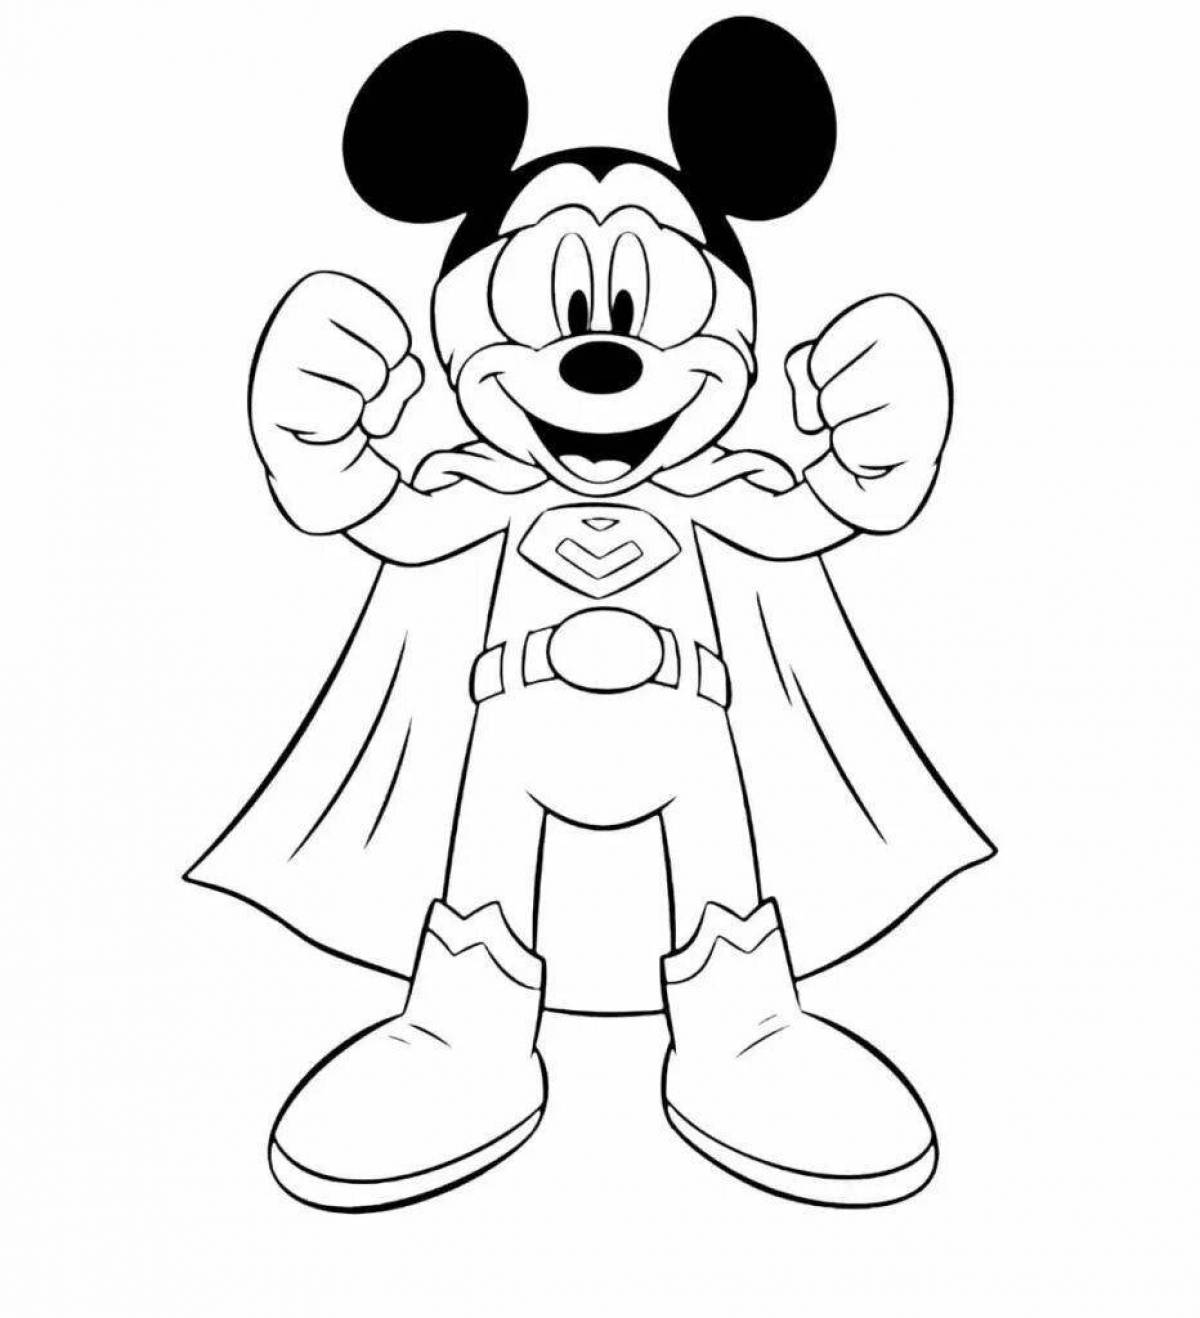 Mickey mouse playful coloring for boys